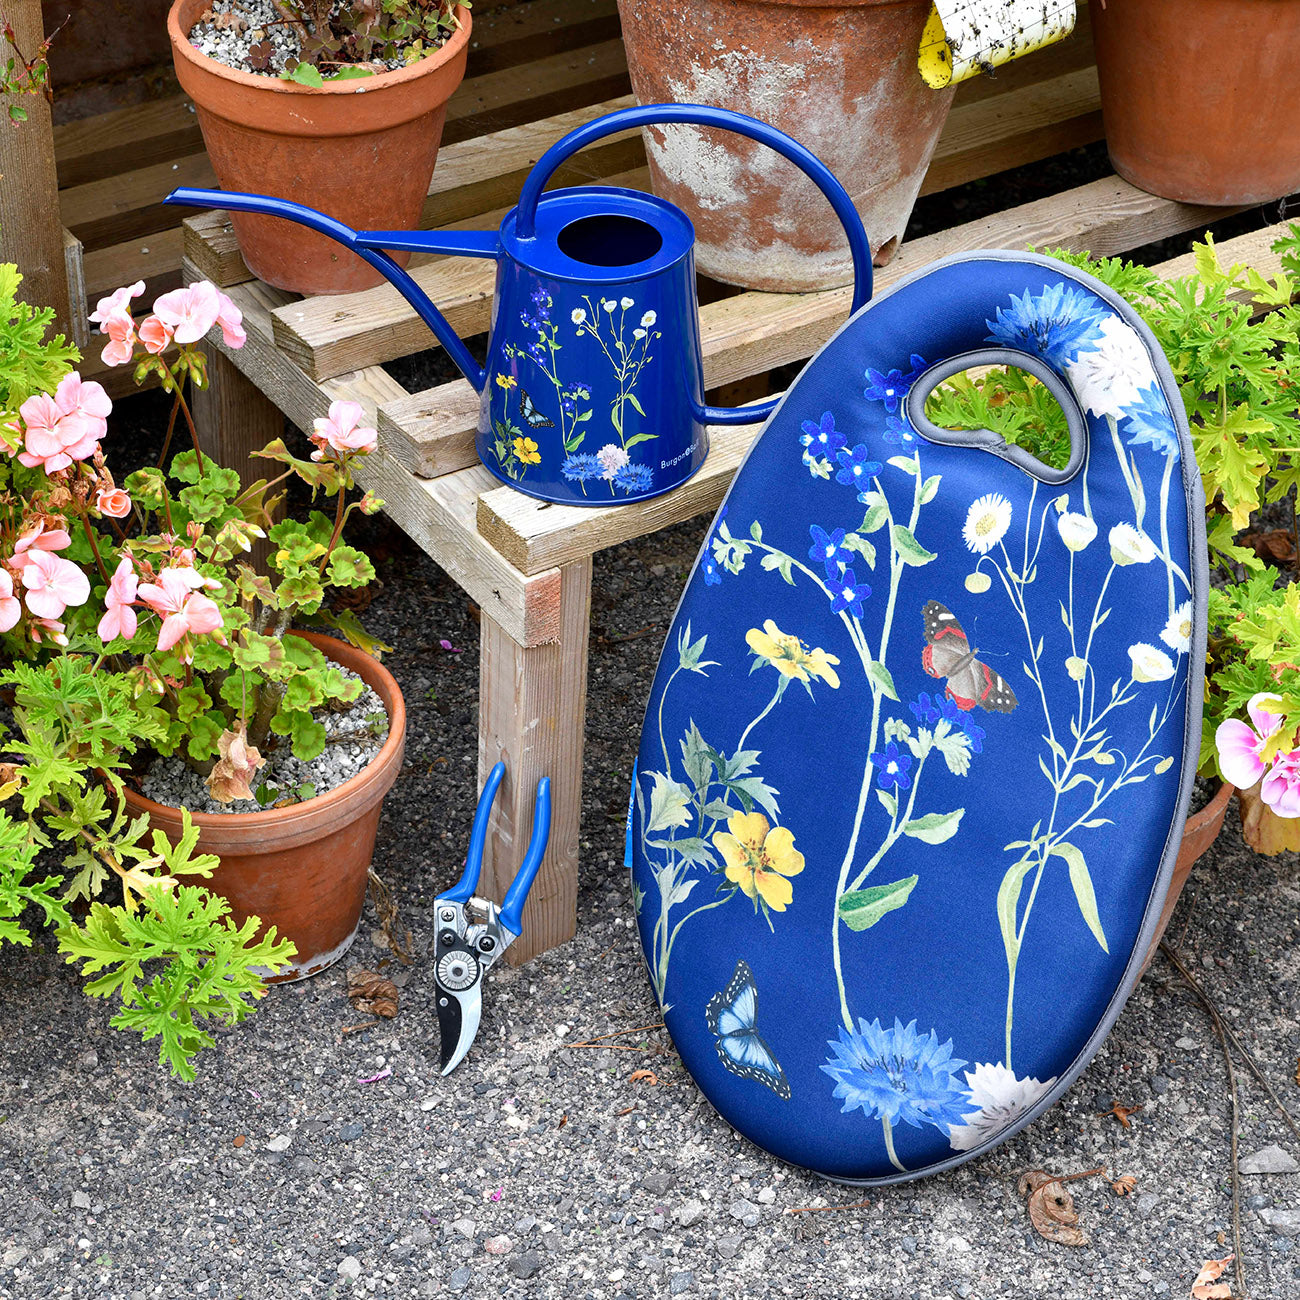 Watering Can, Secateurs and Kneeler from RHS British Meadow collection.